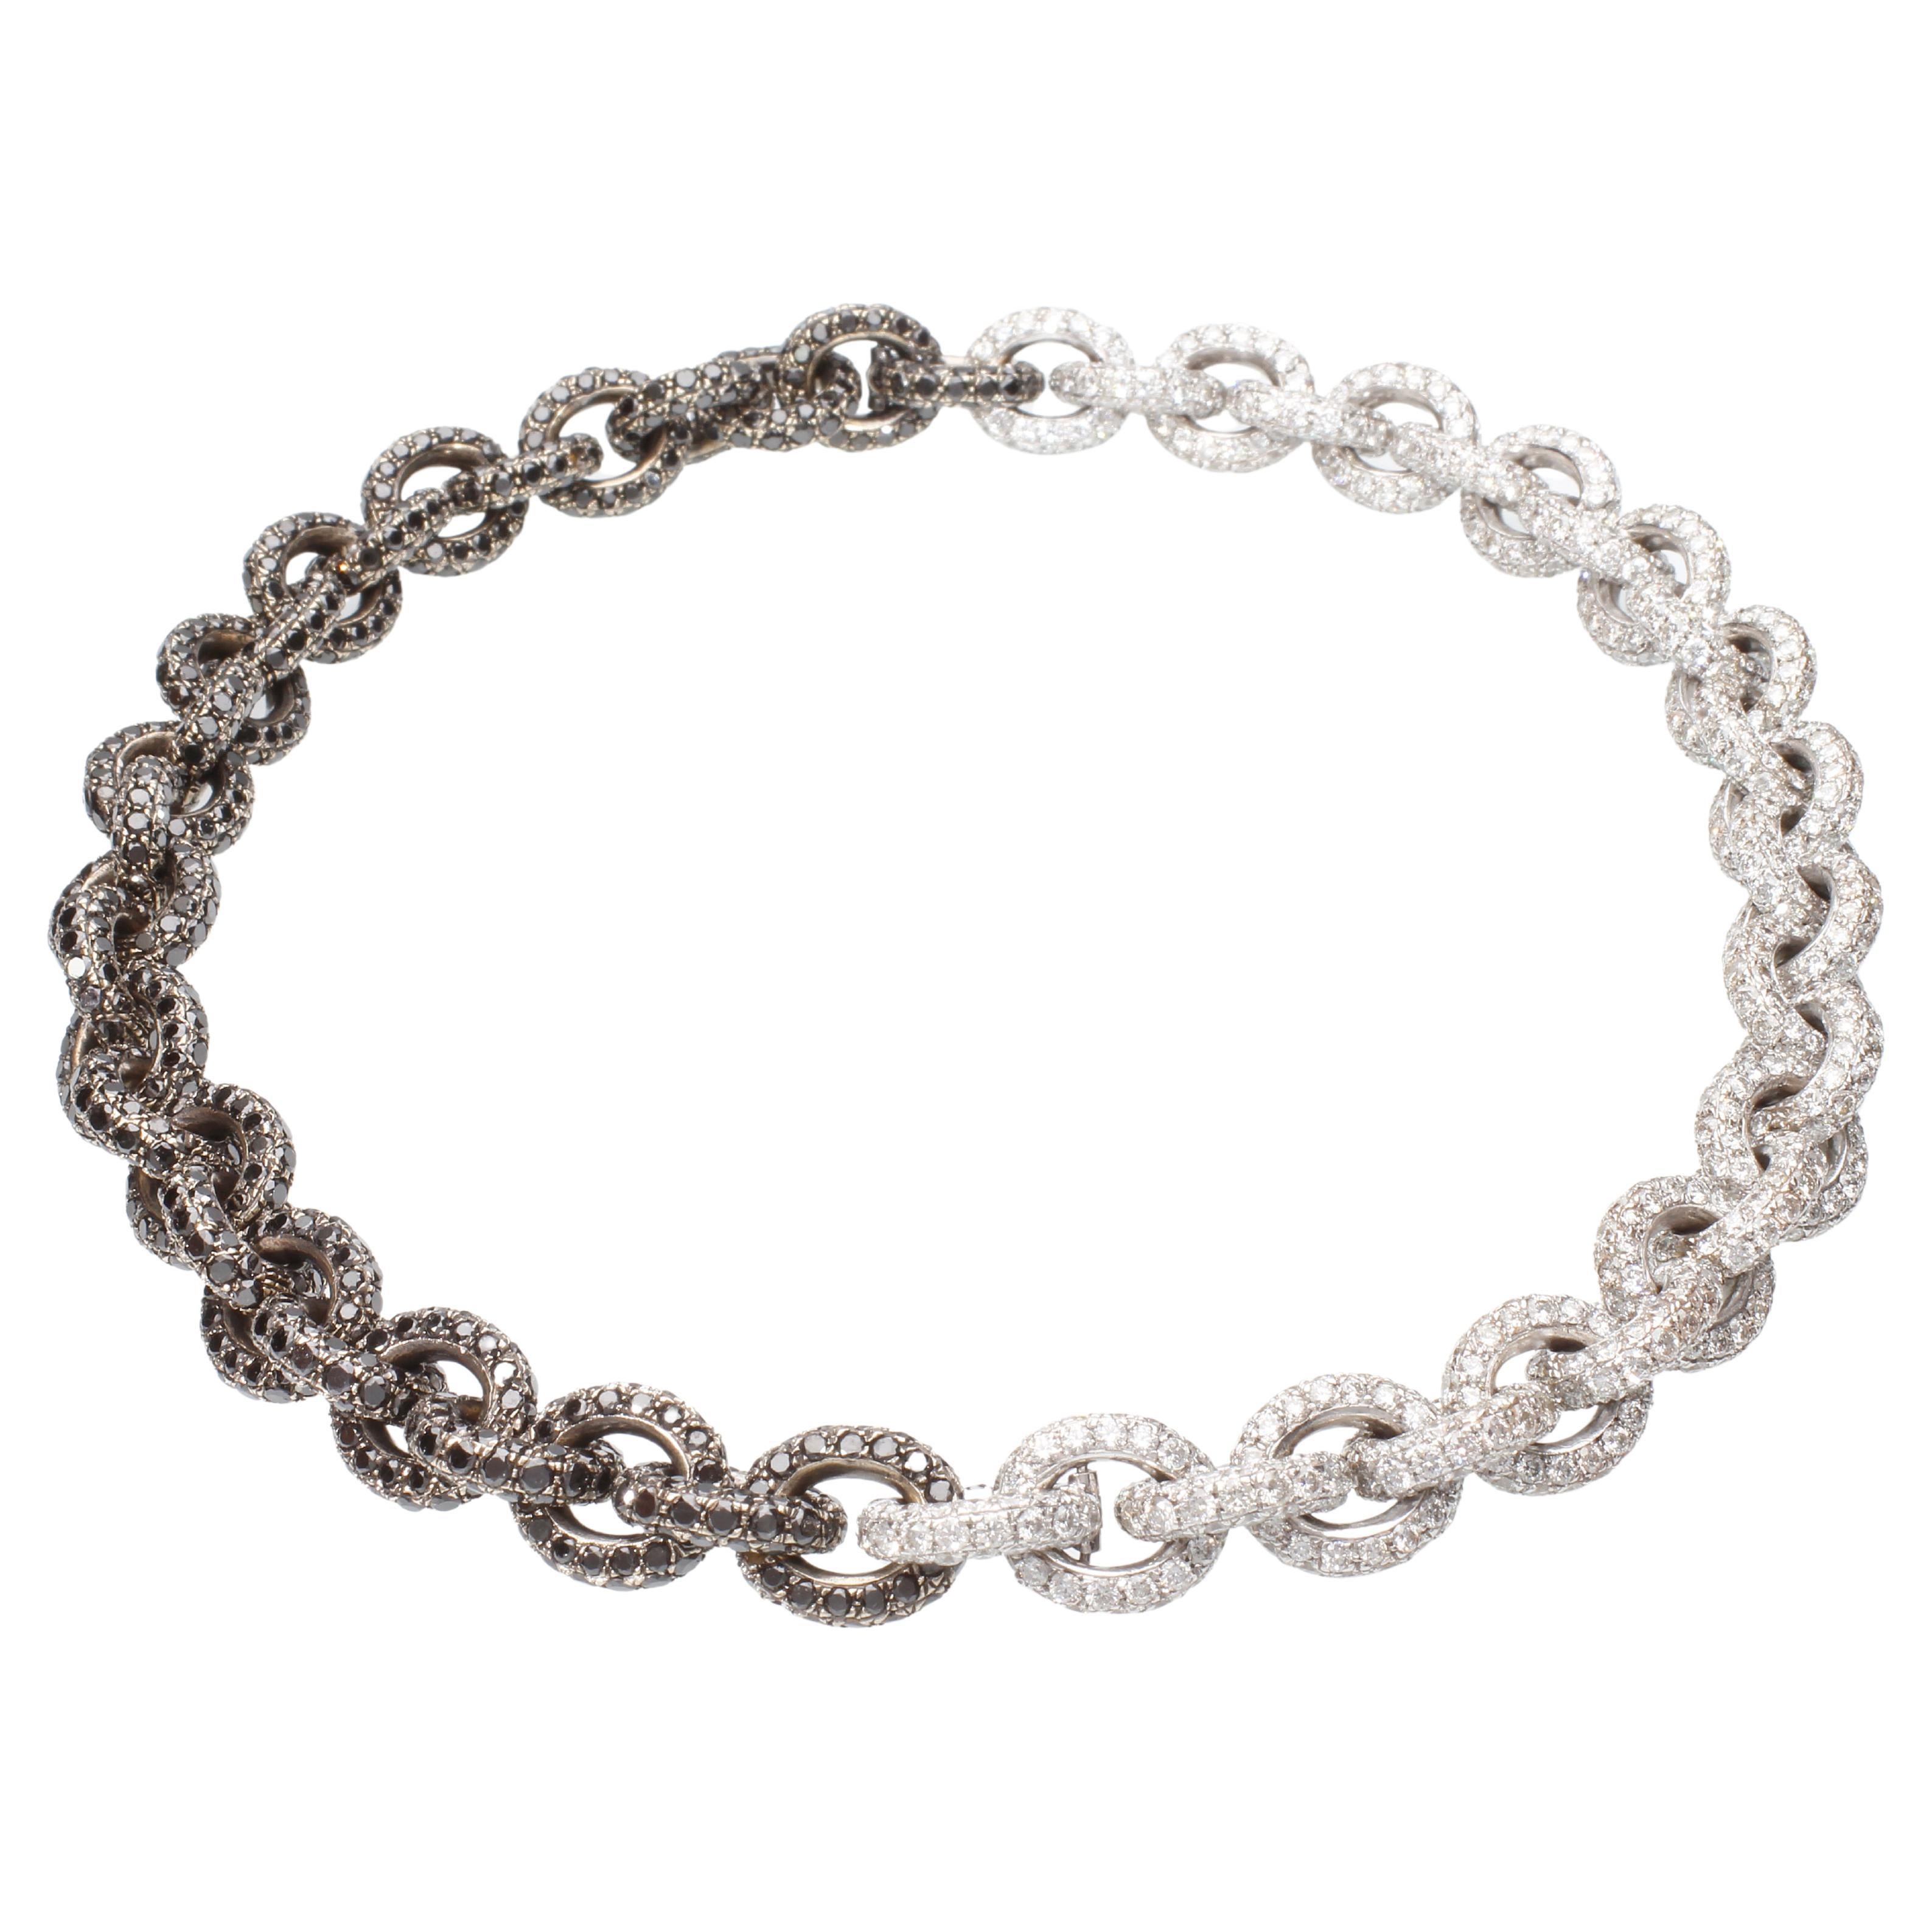 Chain Necklace/Bracelet with 64.26 Ct of White and Black Diamonds. Handmade.